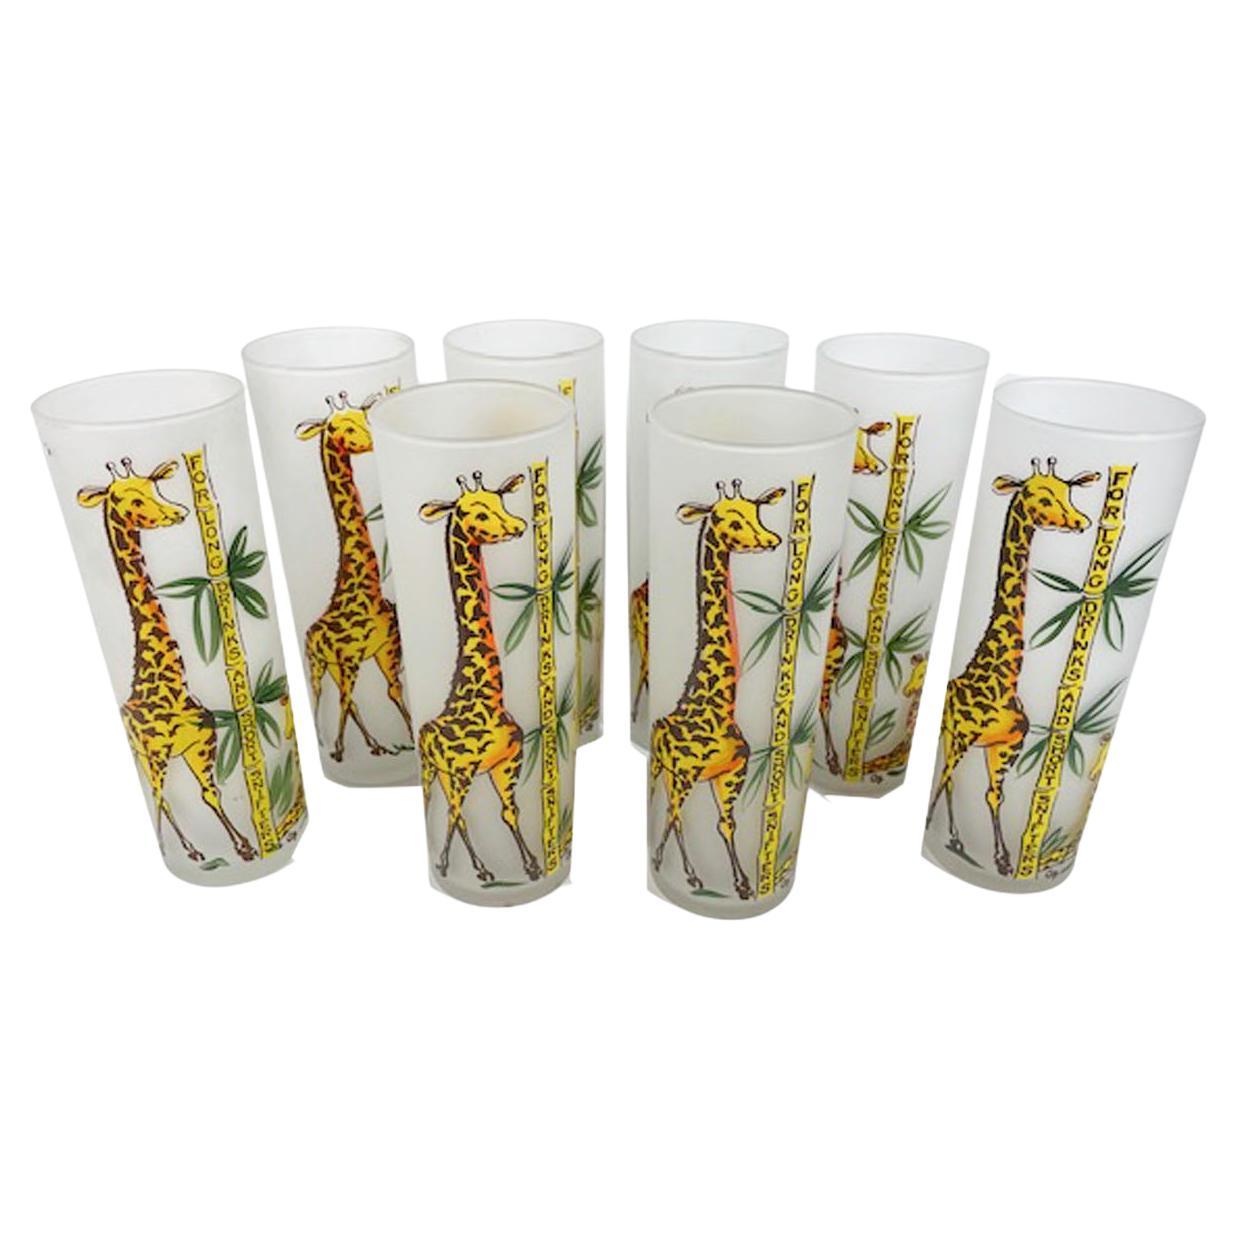 Vintage Tiki / Zombie Glasses Giraffes Painted by Gay Fad on Libbey Glass Blanks For Sale